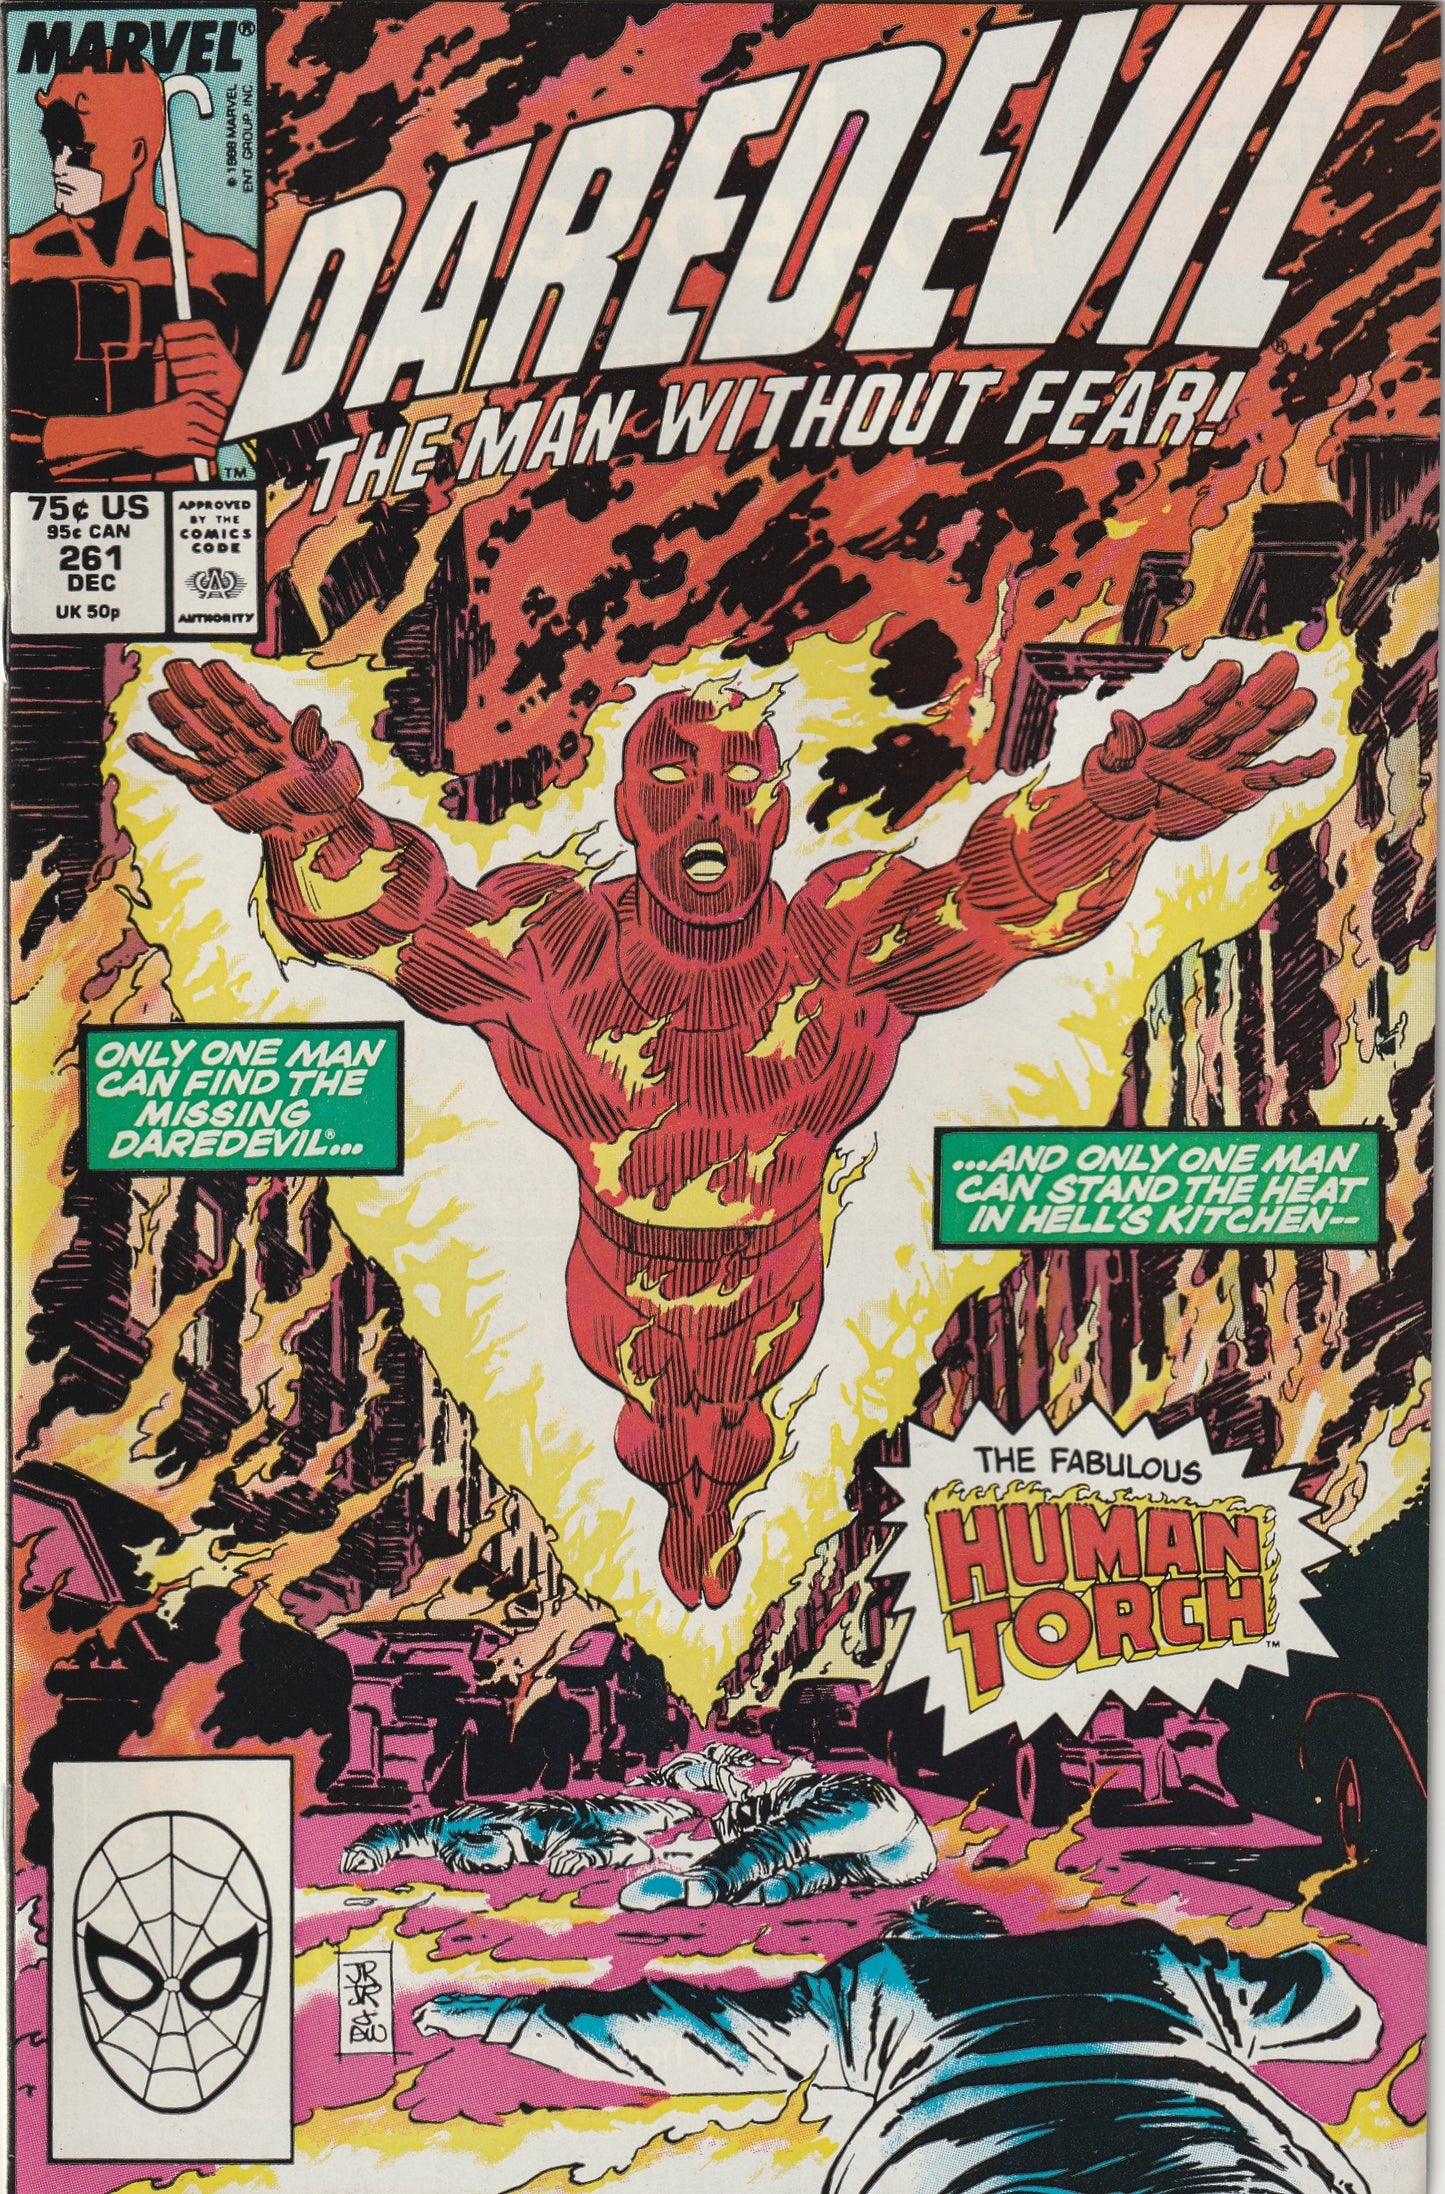 Daredevil #261 (1988) - Human Torch appearance